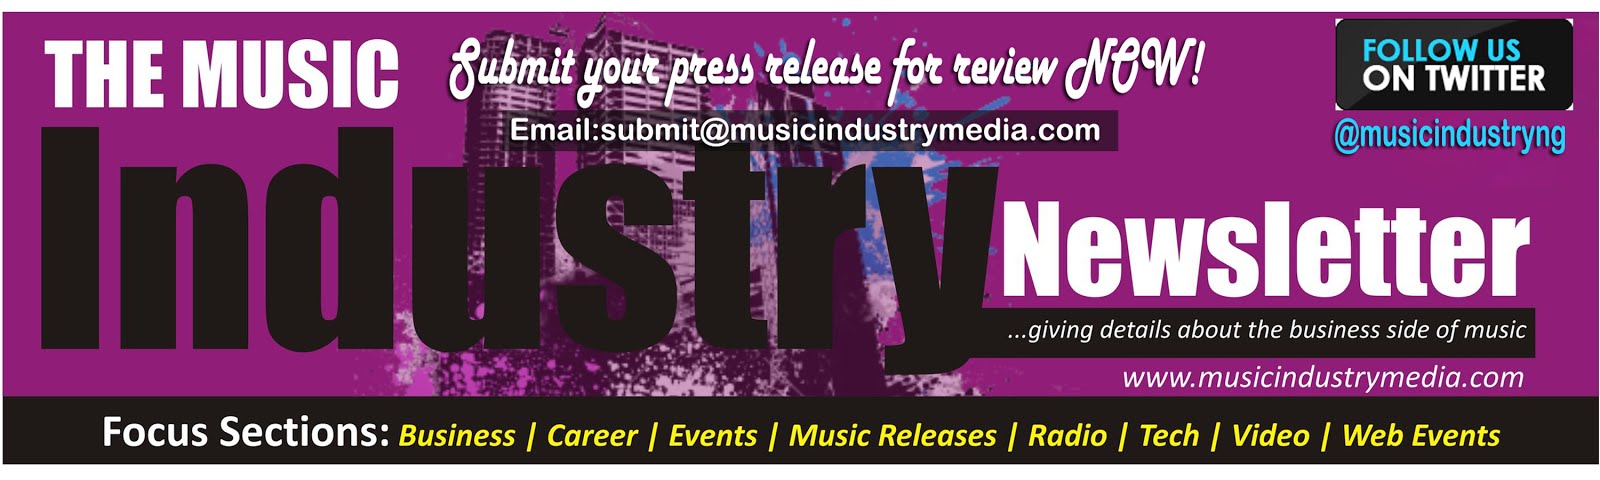 THE MUSIC INDUSTRY NEWSLETTER